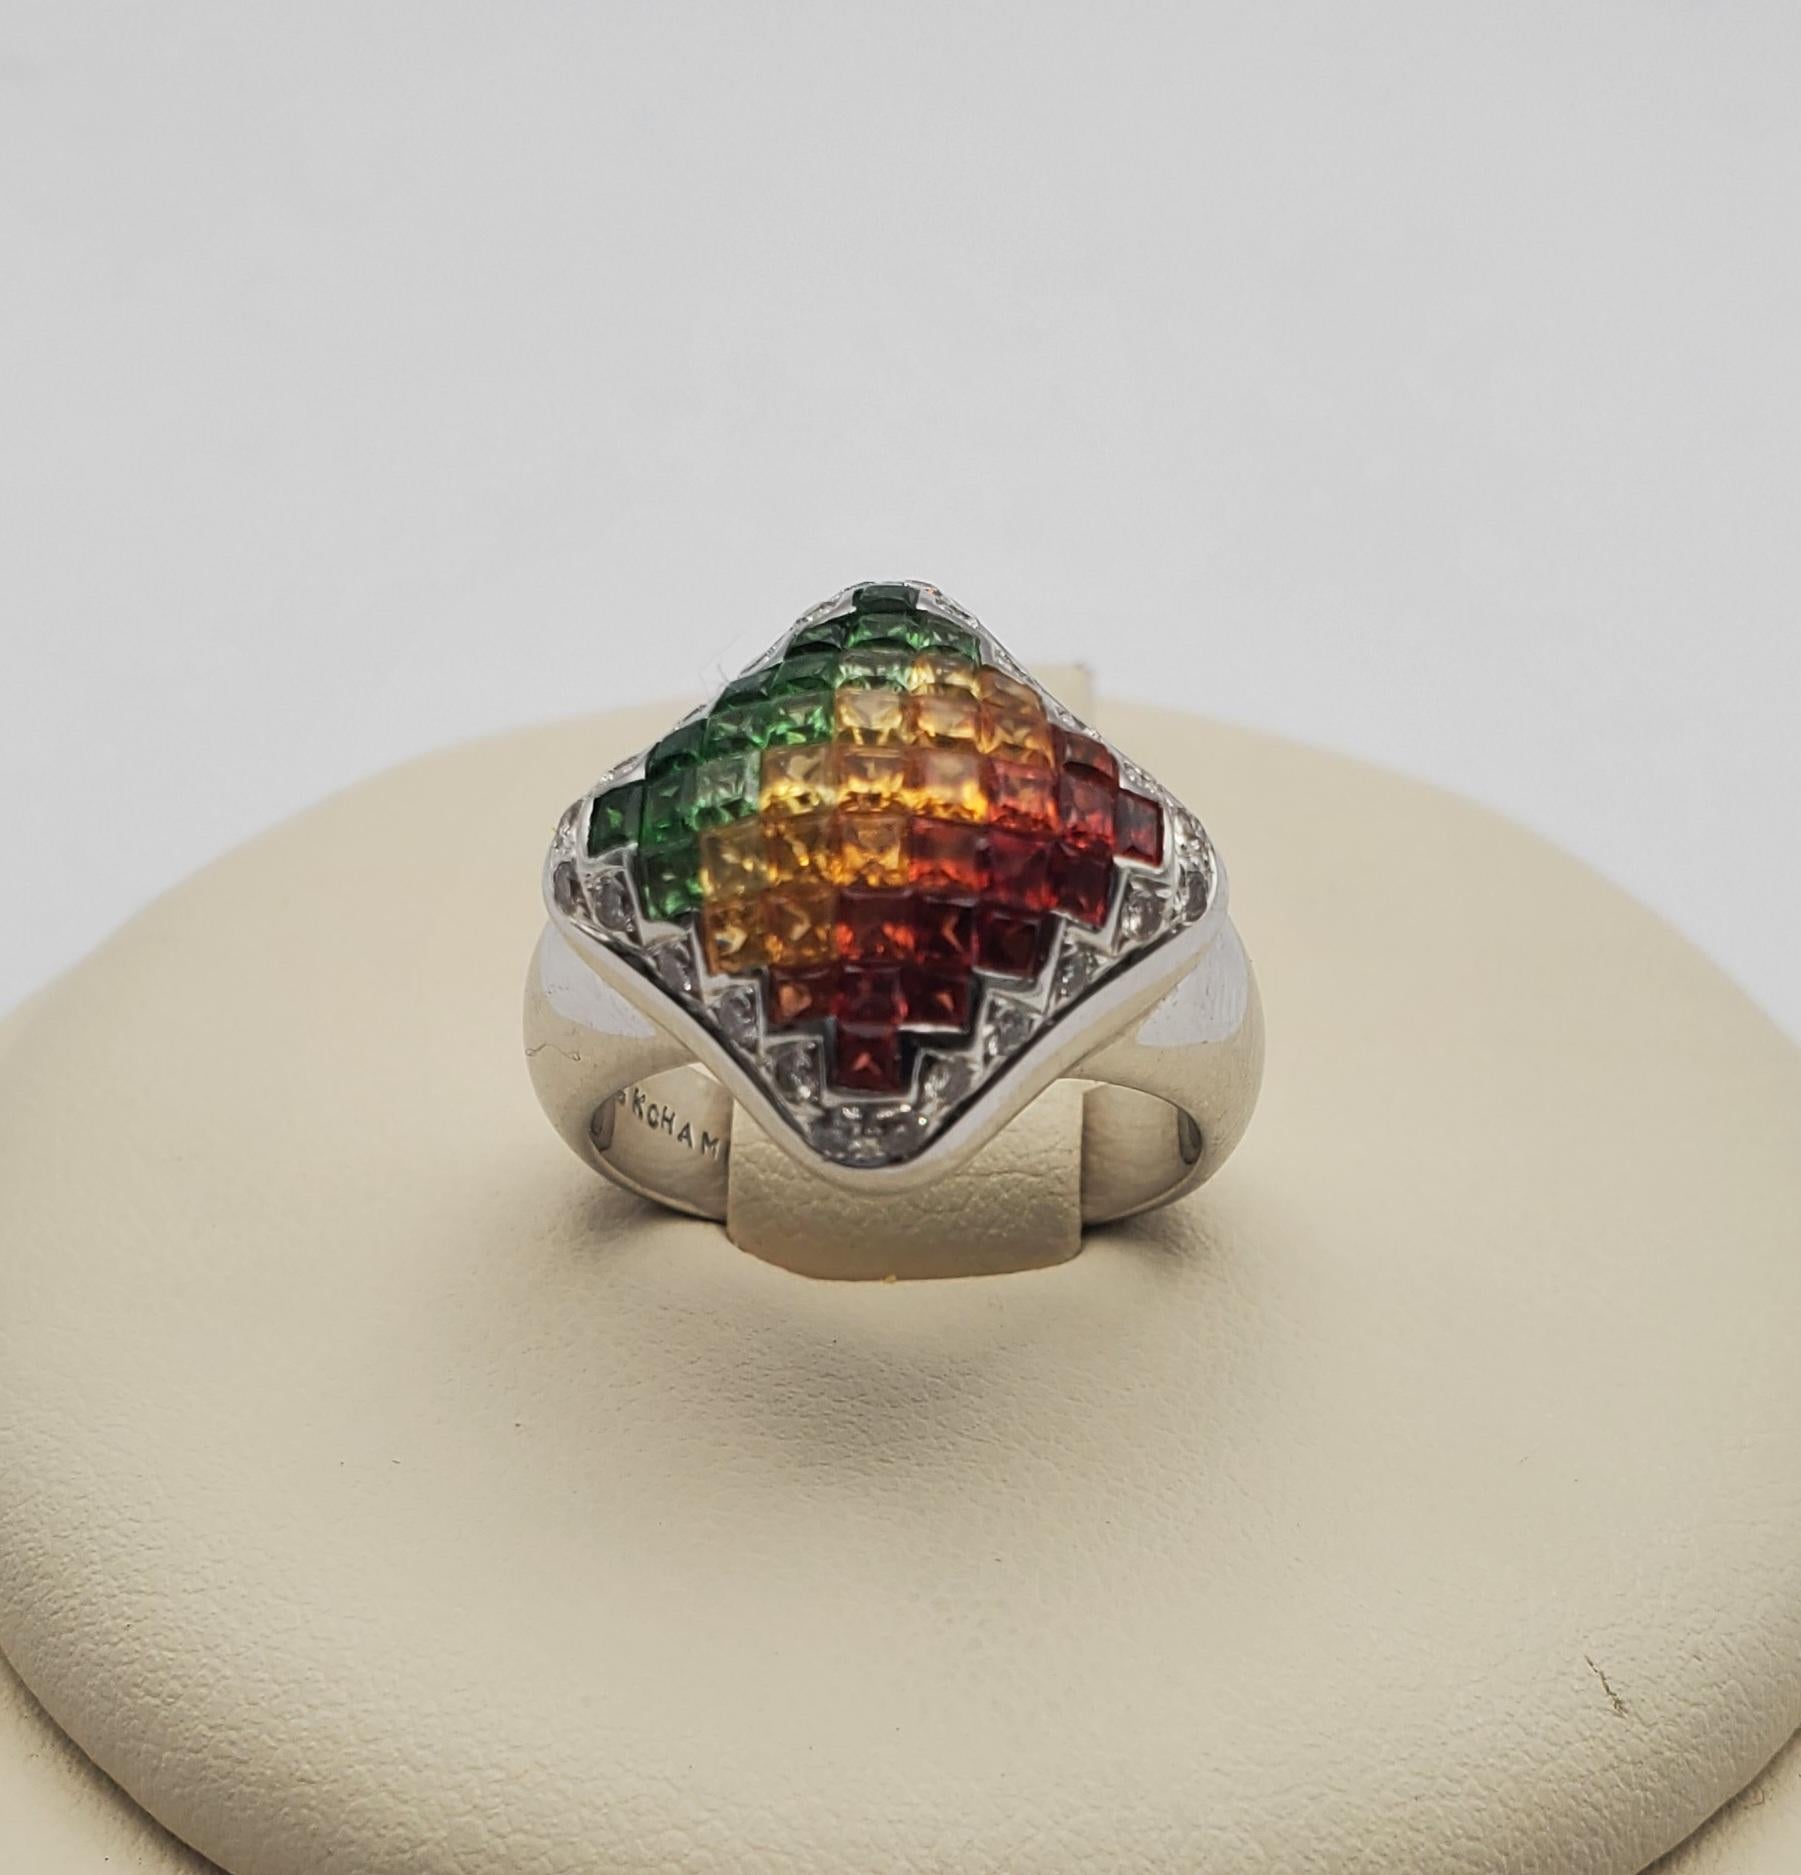 Gorgeous Chameleon brand gradient/ombre ruby, citrine and tsavorite garnet ring. This ring features invisible set princess cut gem stones in a domed square shape surrounded by a halo of bead set round diamonds. This modern and colorful piece is